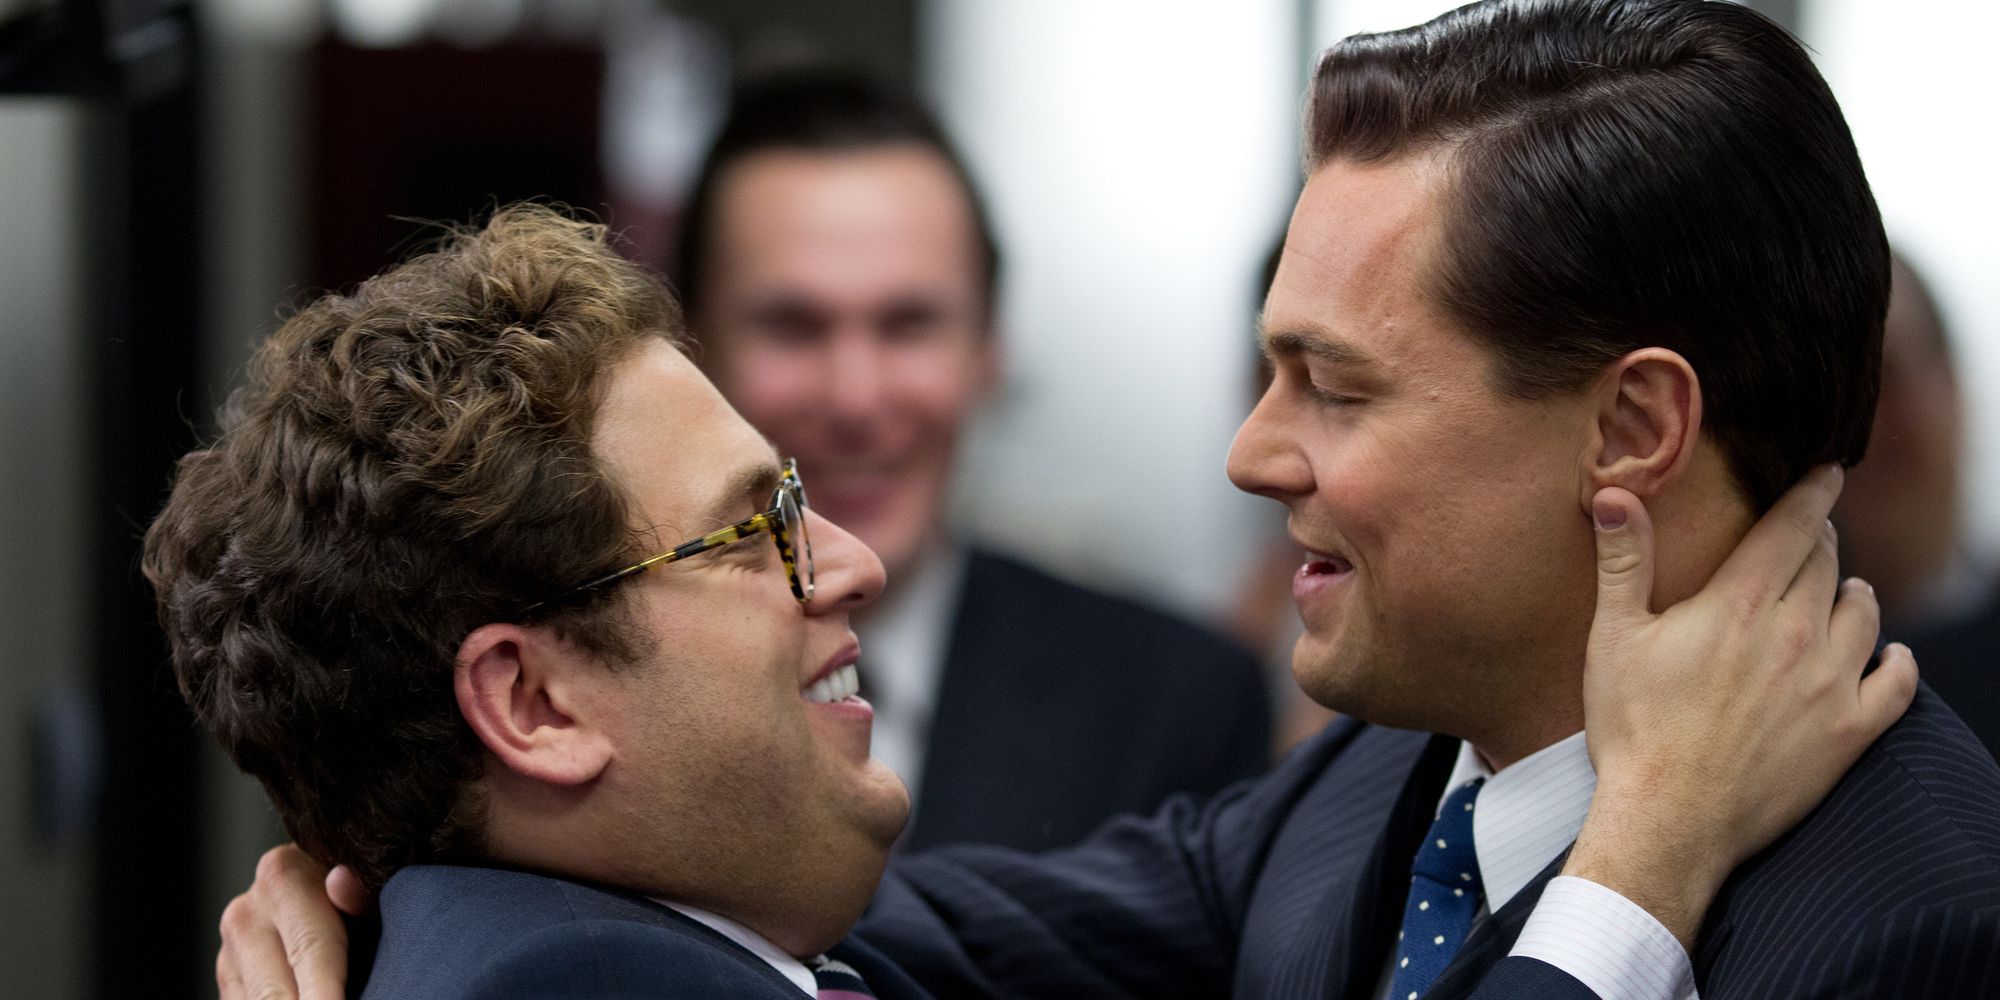 The Best Jonah Hill Movies & Where to Stream Them